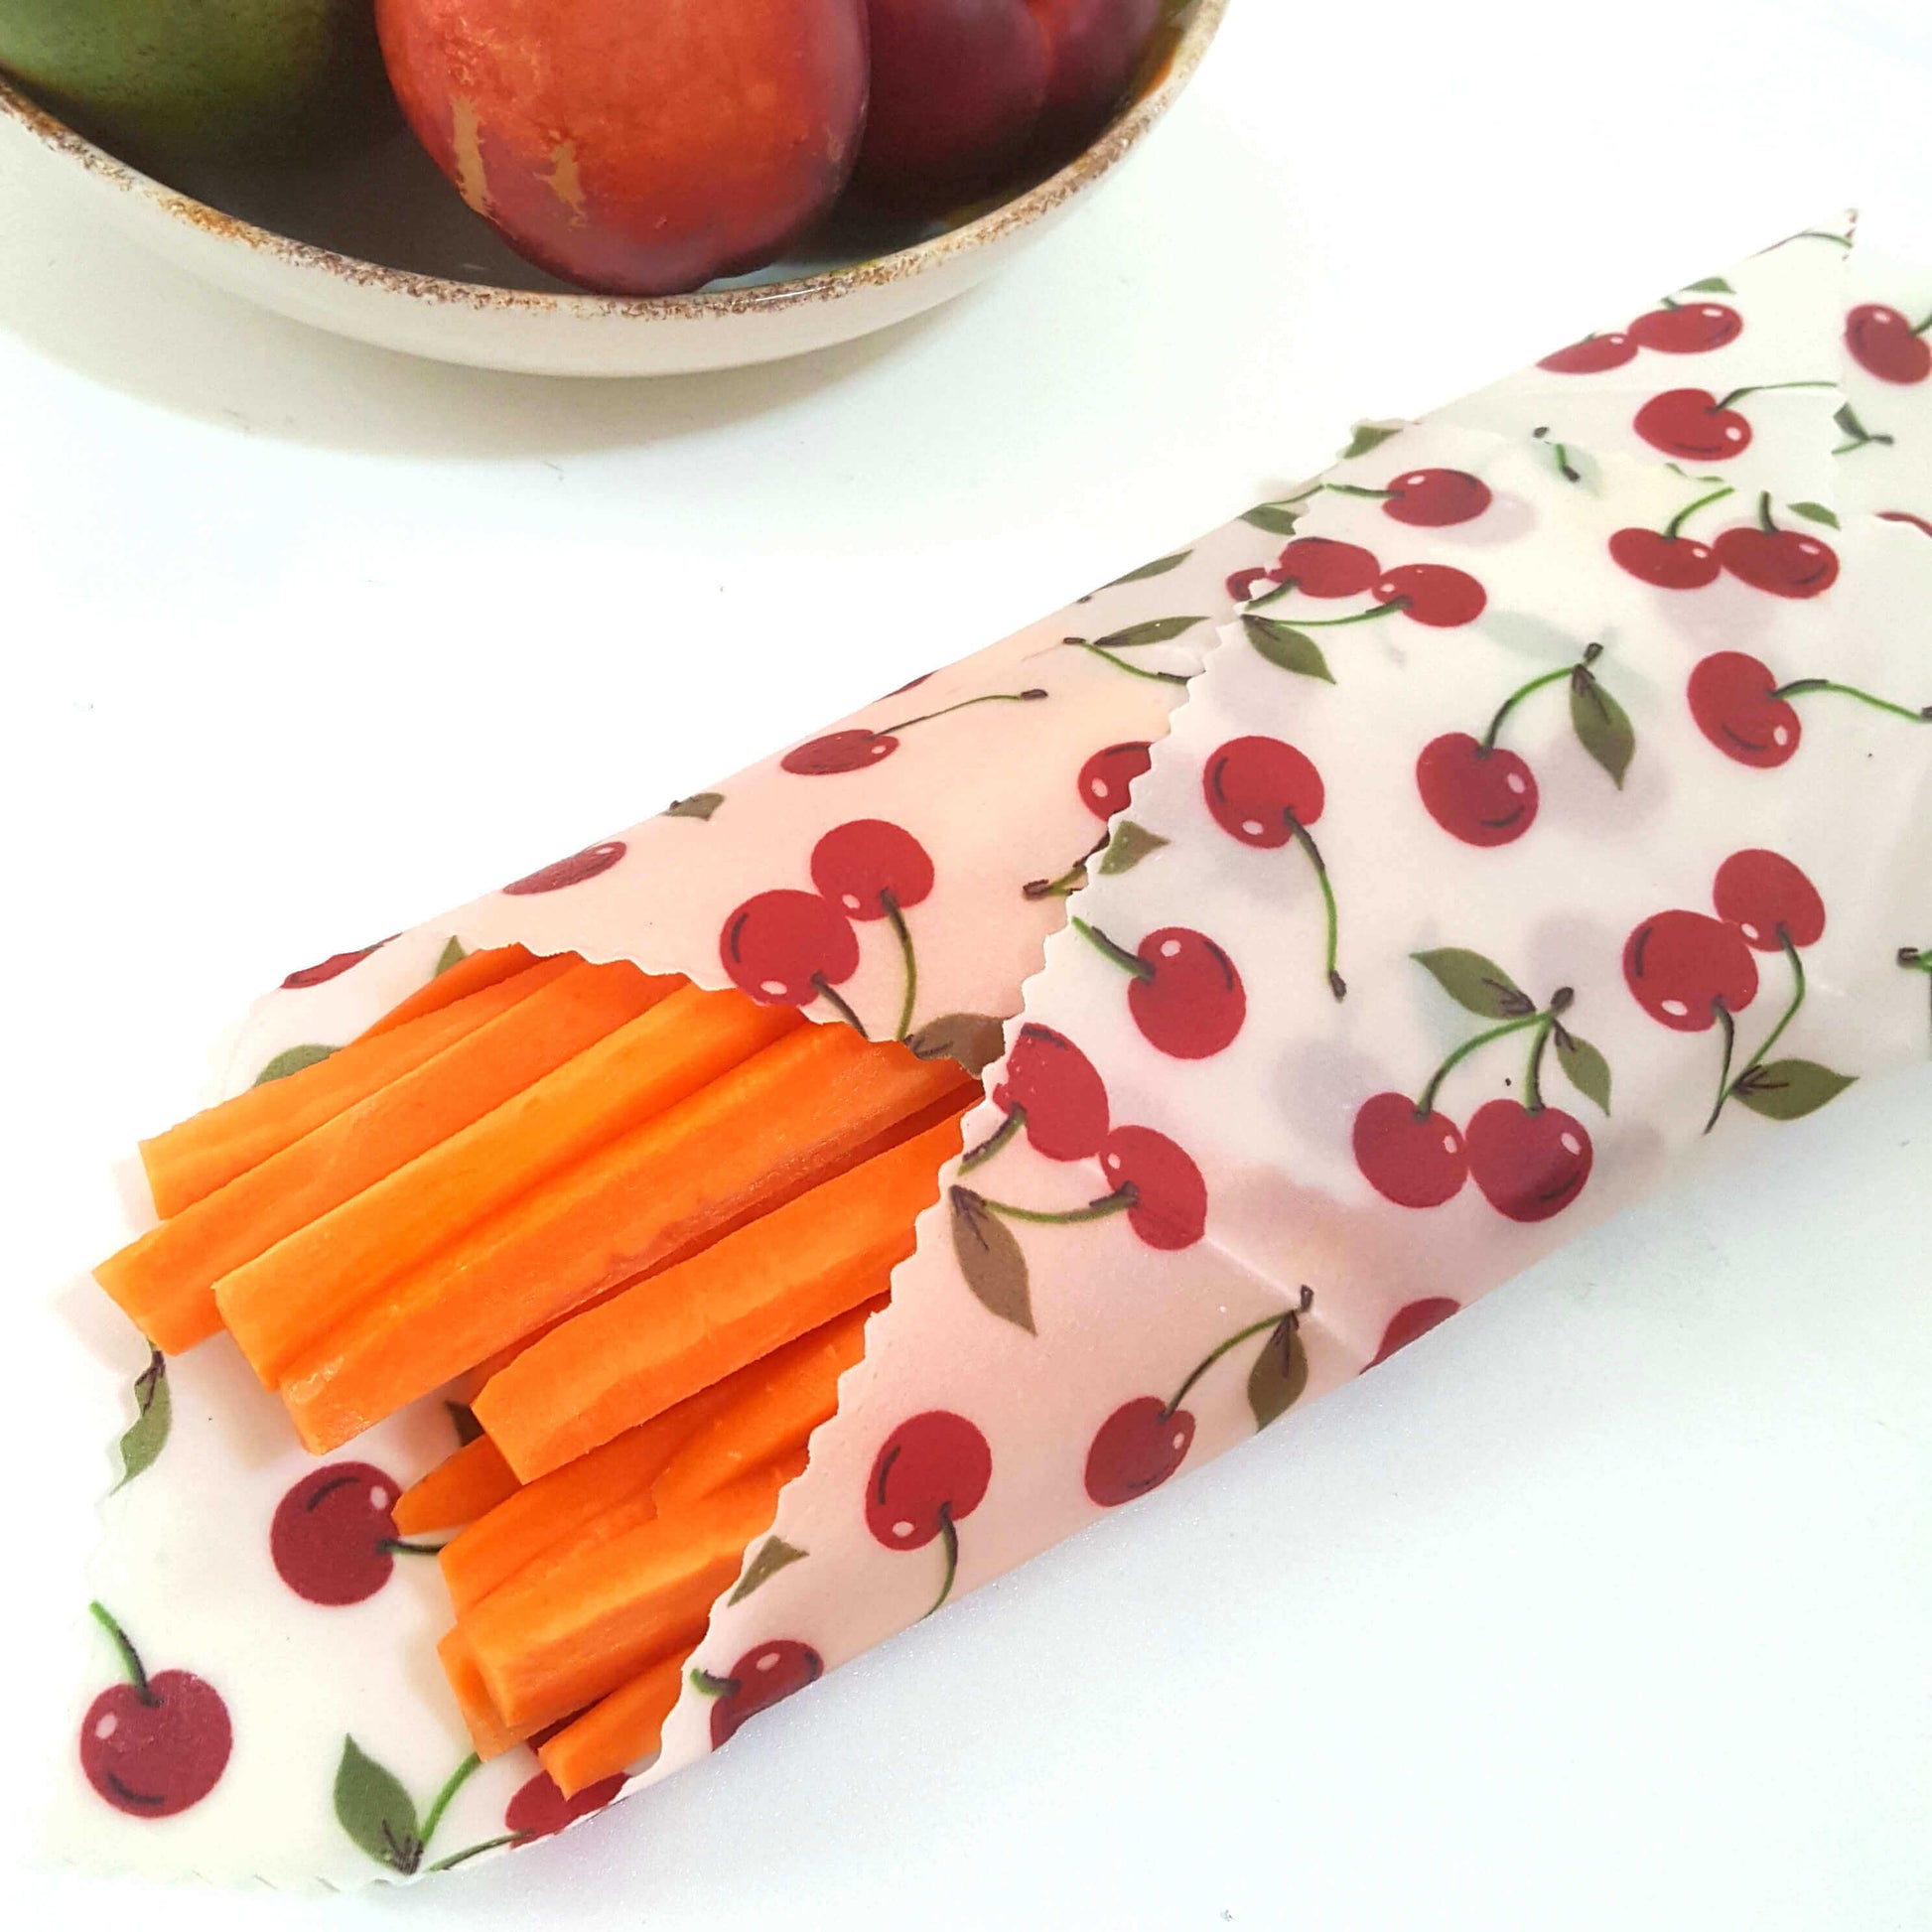 Reusable Beeswax Food Wraps 100% Hand Made in the UK by Honey Bee Good. Planet-Kind single large beeswax wrap in Cherries pattern as flatlay with carrots